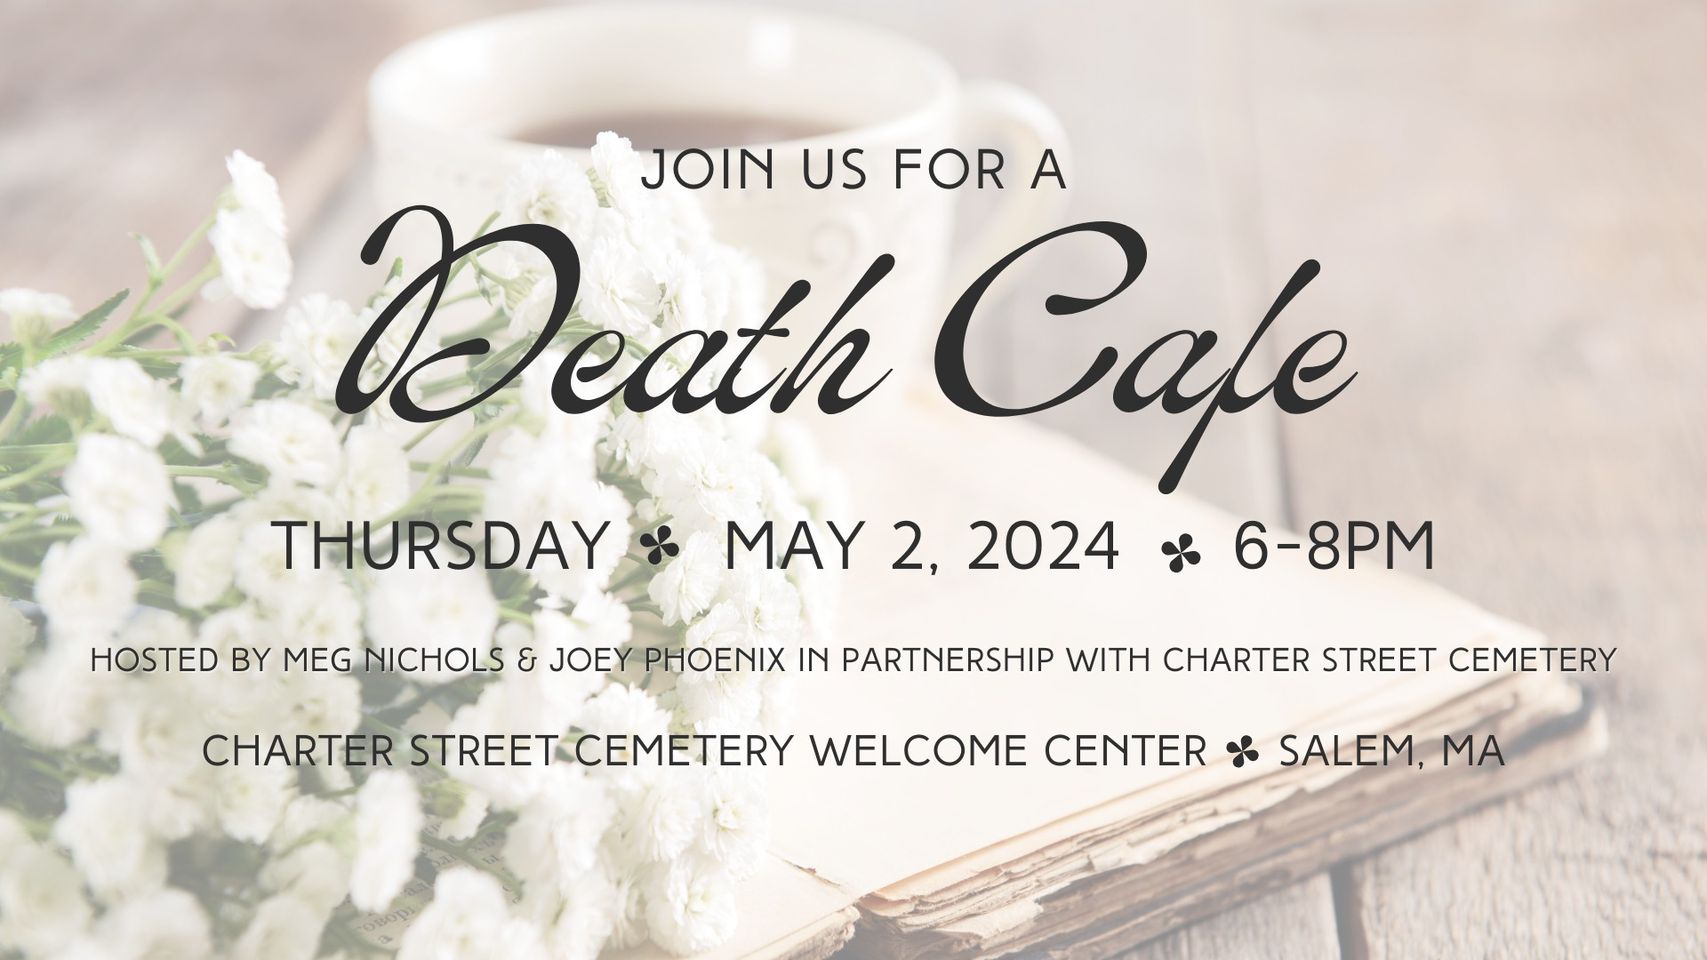 Join us at our next Death Cafe event in Salem, Massachusetts on May 2, 2024. Come enjoy this unique experience from 6pm to 8pm amongst beautiful white flowers and warm coffee cups. It's more than just an event - it's a conversation about life and death in a safe space. Hope to see you there!